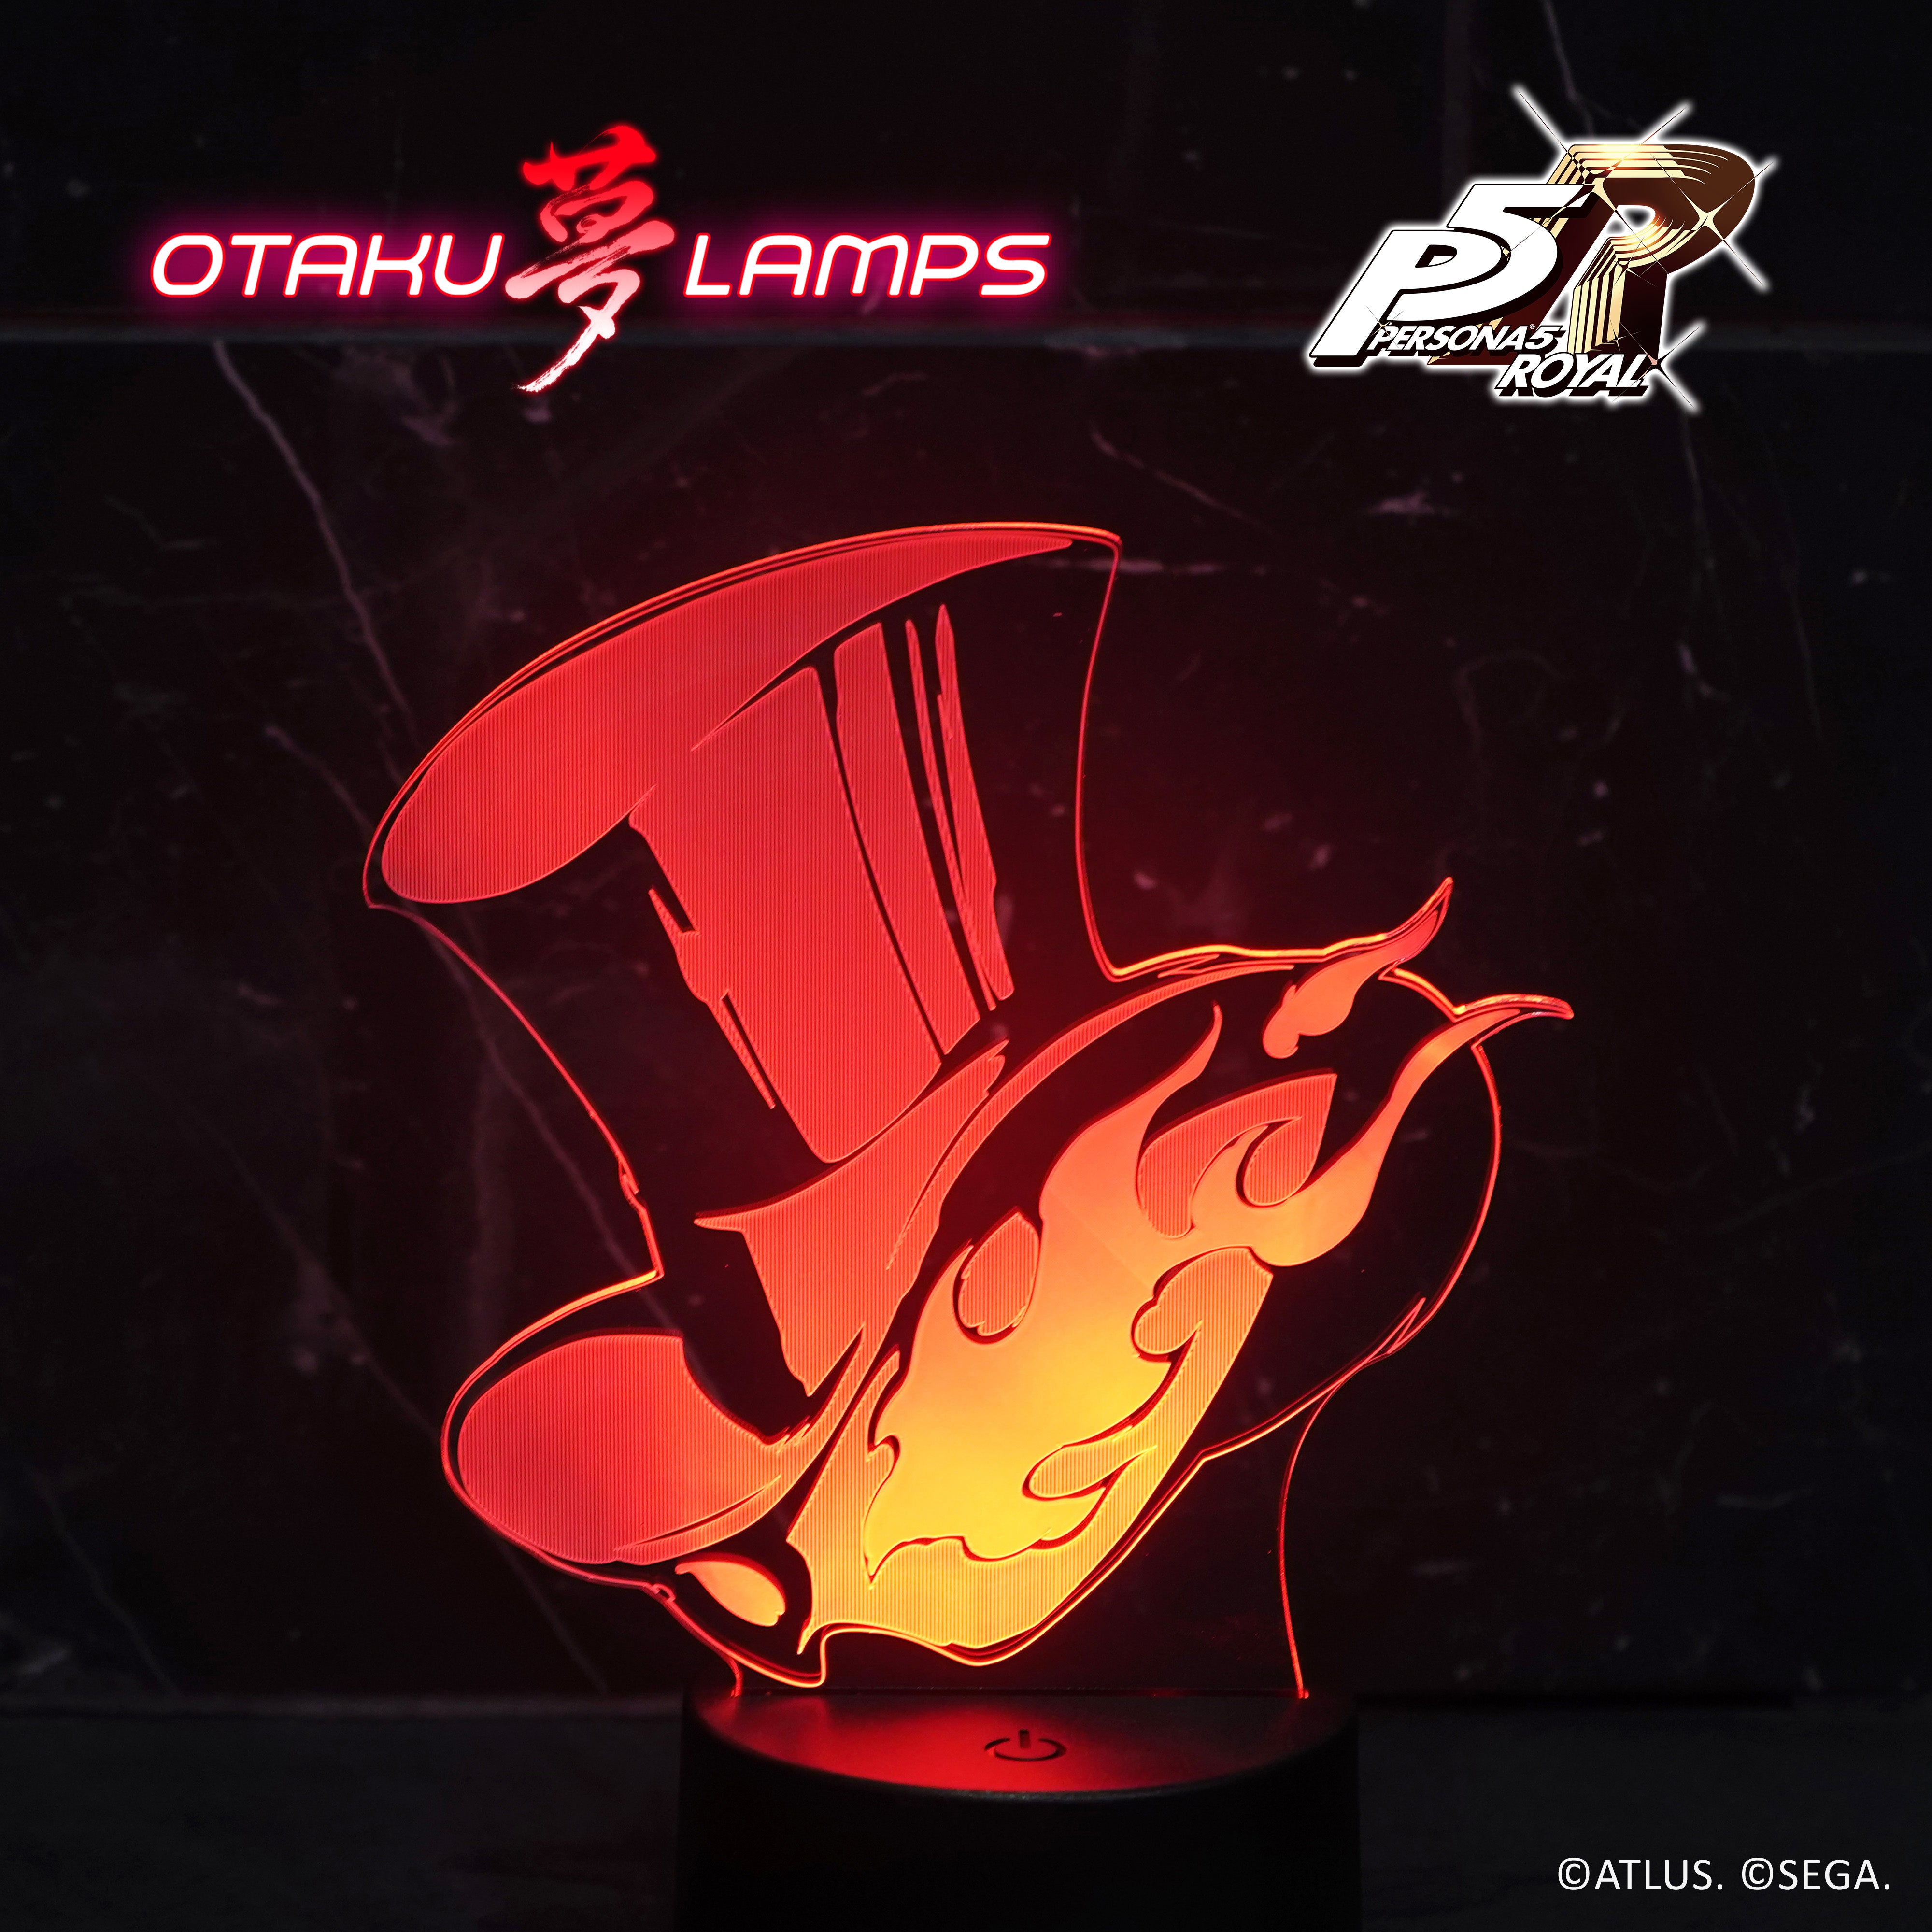 Persona 5 Royal X Otaku Lamps collab has arrived! [SPRINGTIME SPECIAL]